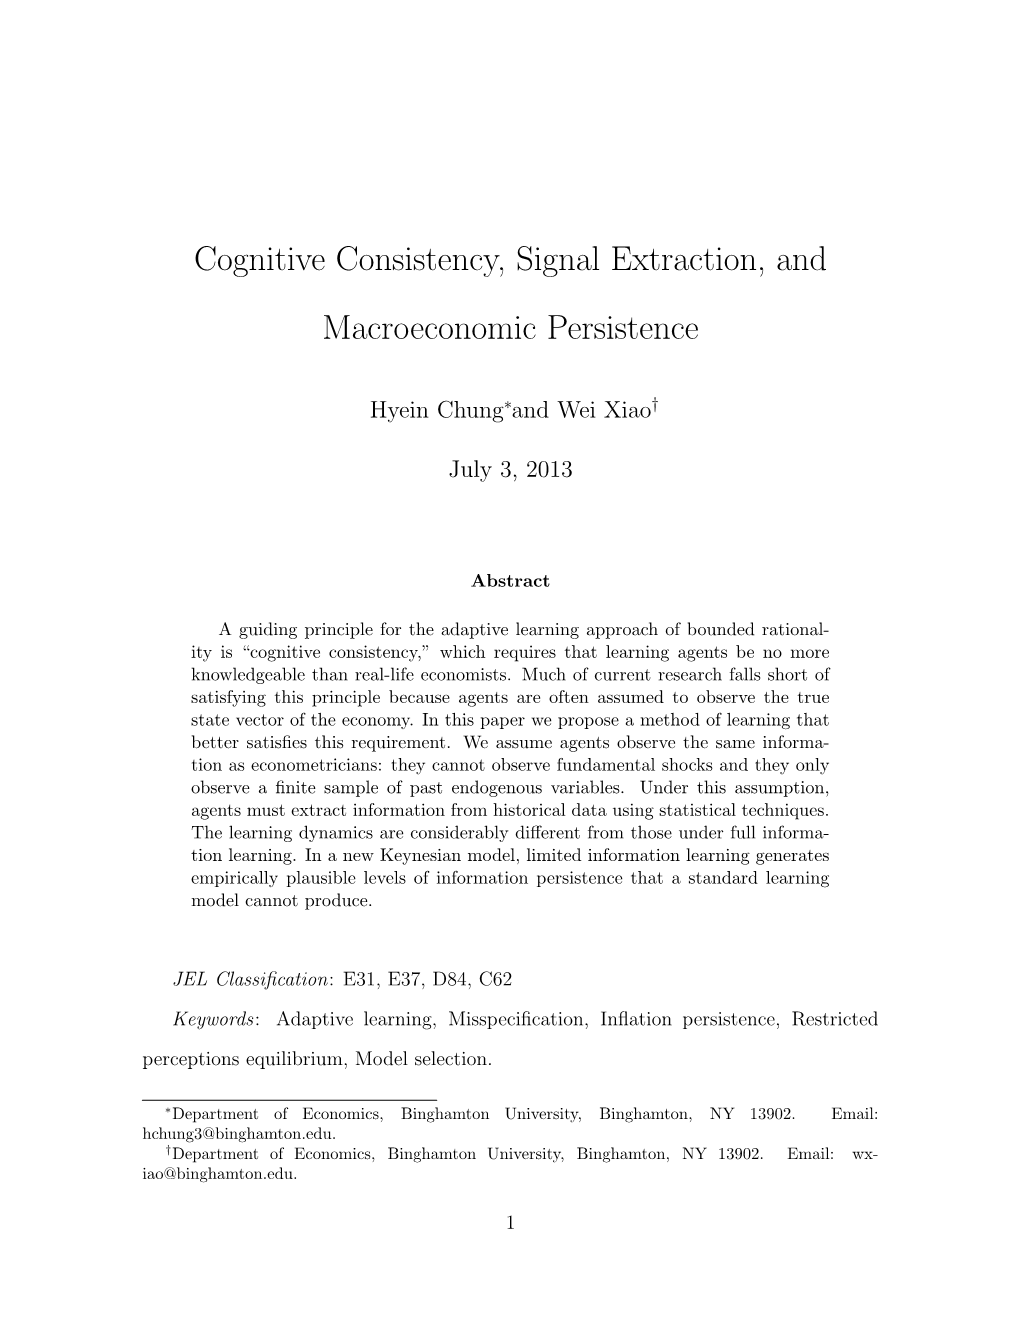 Cognitive Consistency, Signal Extraction, and Macroeconomic Persistence